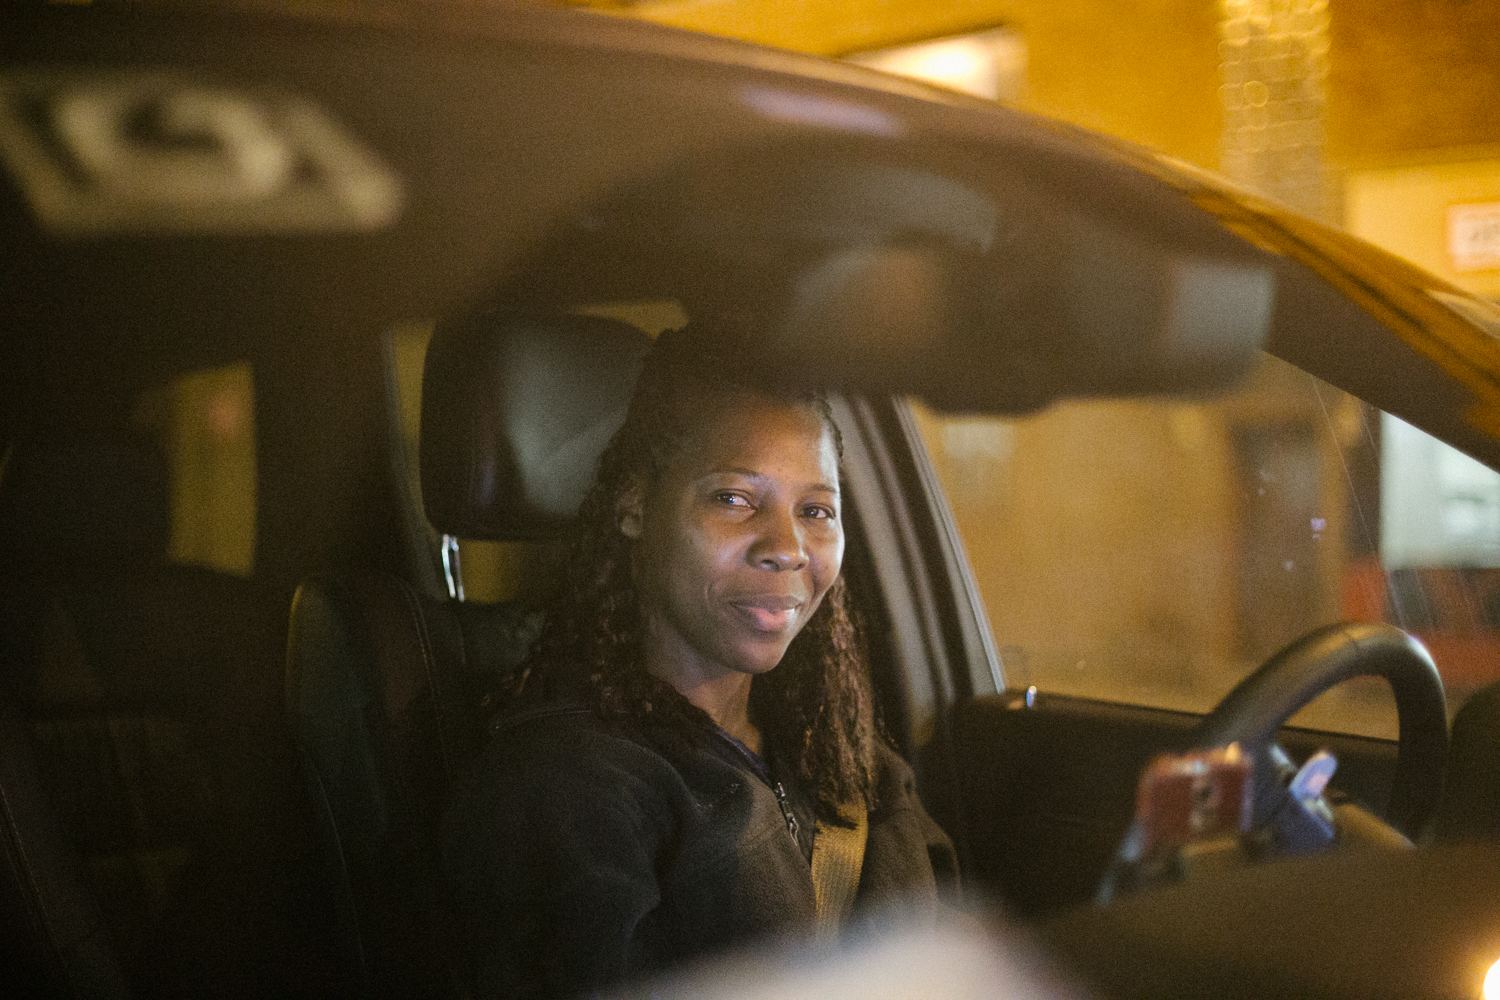  Efia, who was born in the Caribbean, raised in New York, has been driving for Uber for a year and a half. 30 rides given yesterday. 16/24 